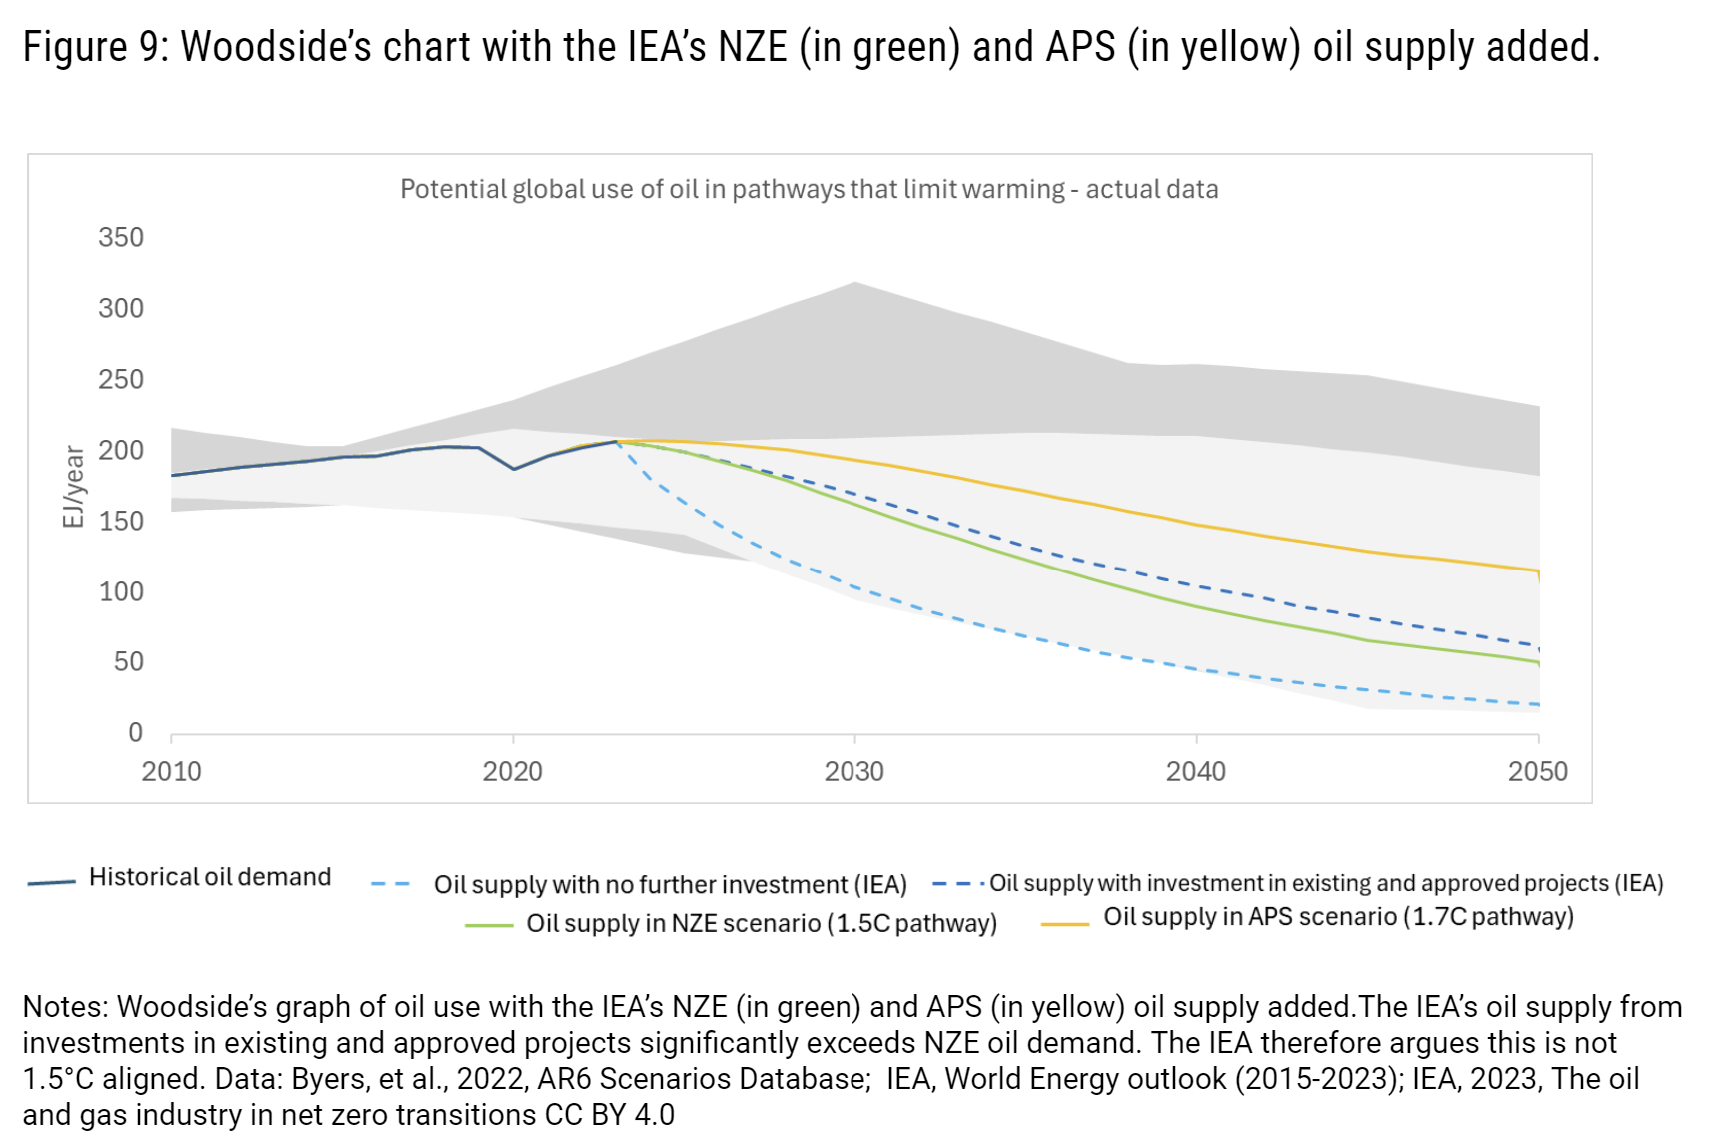 Woodside’s chart with the IEA’s NZE (in green) and APS (in yellow) oil supply added.